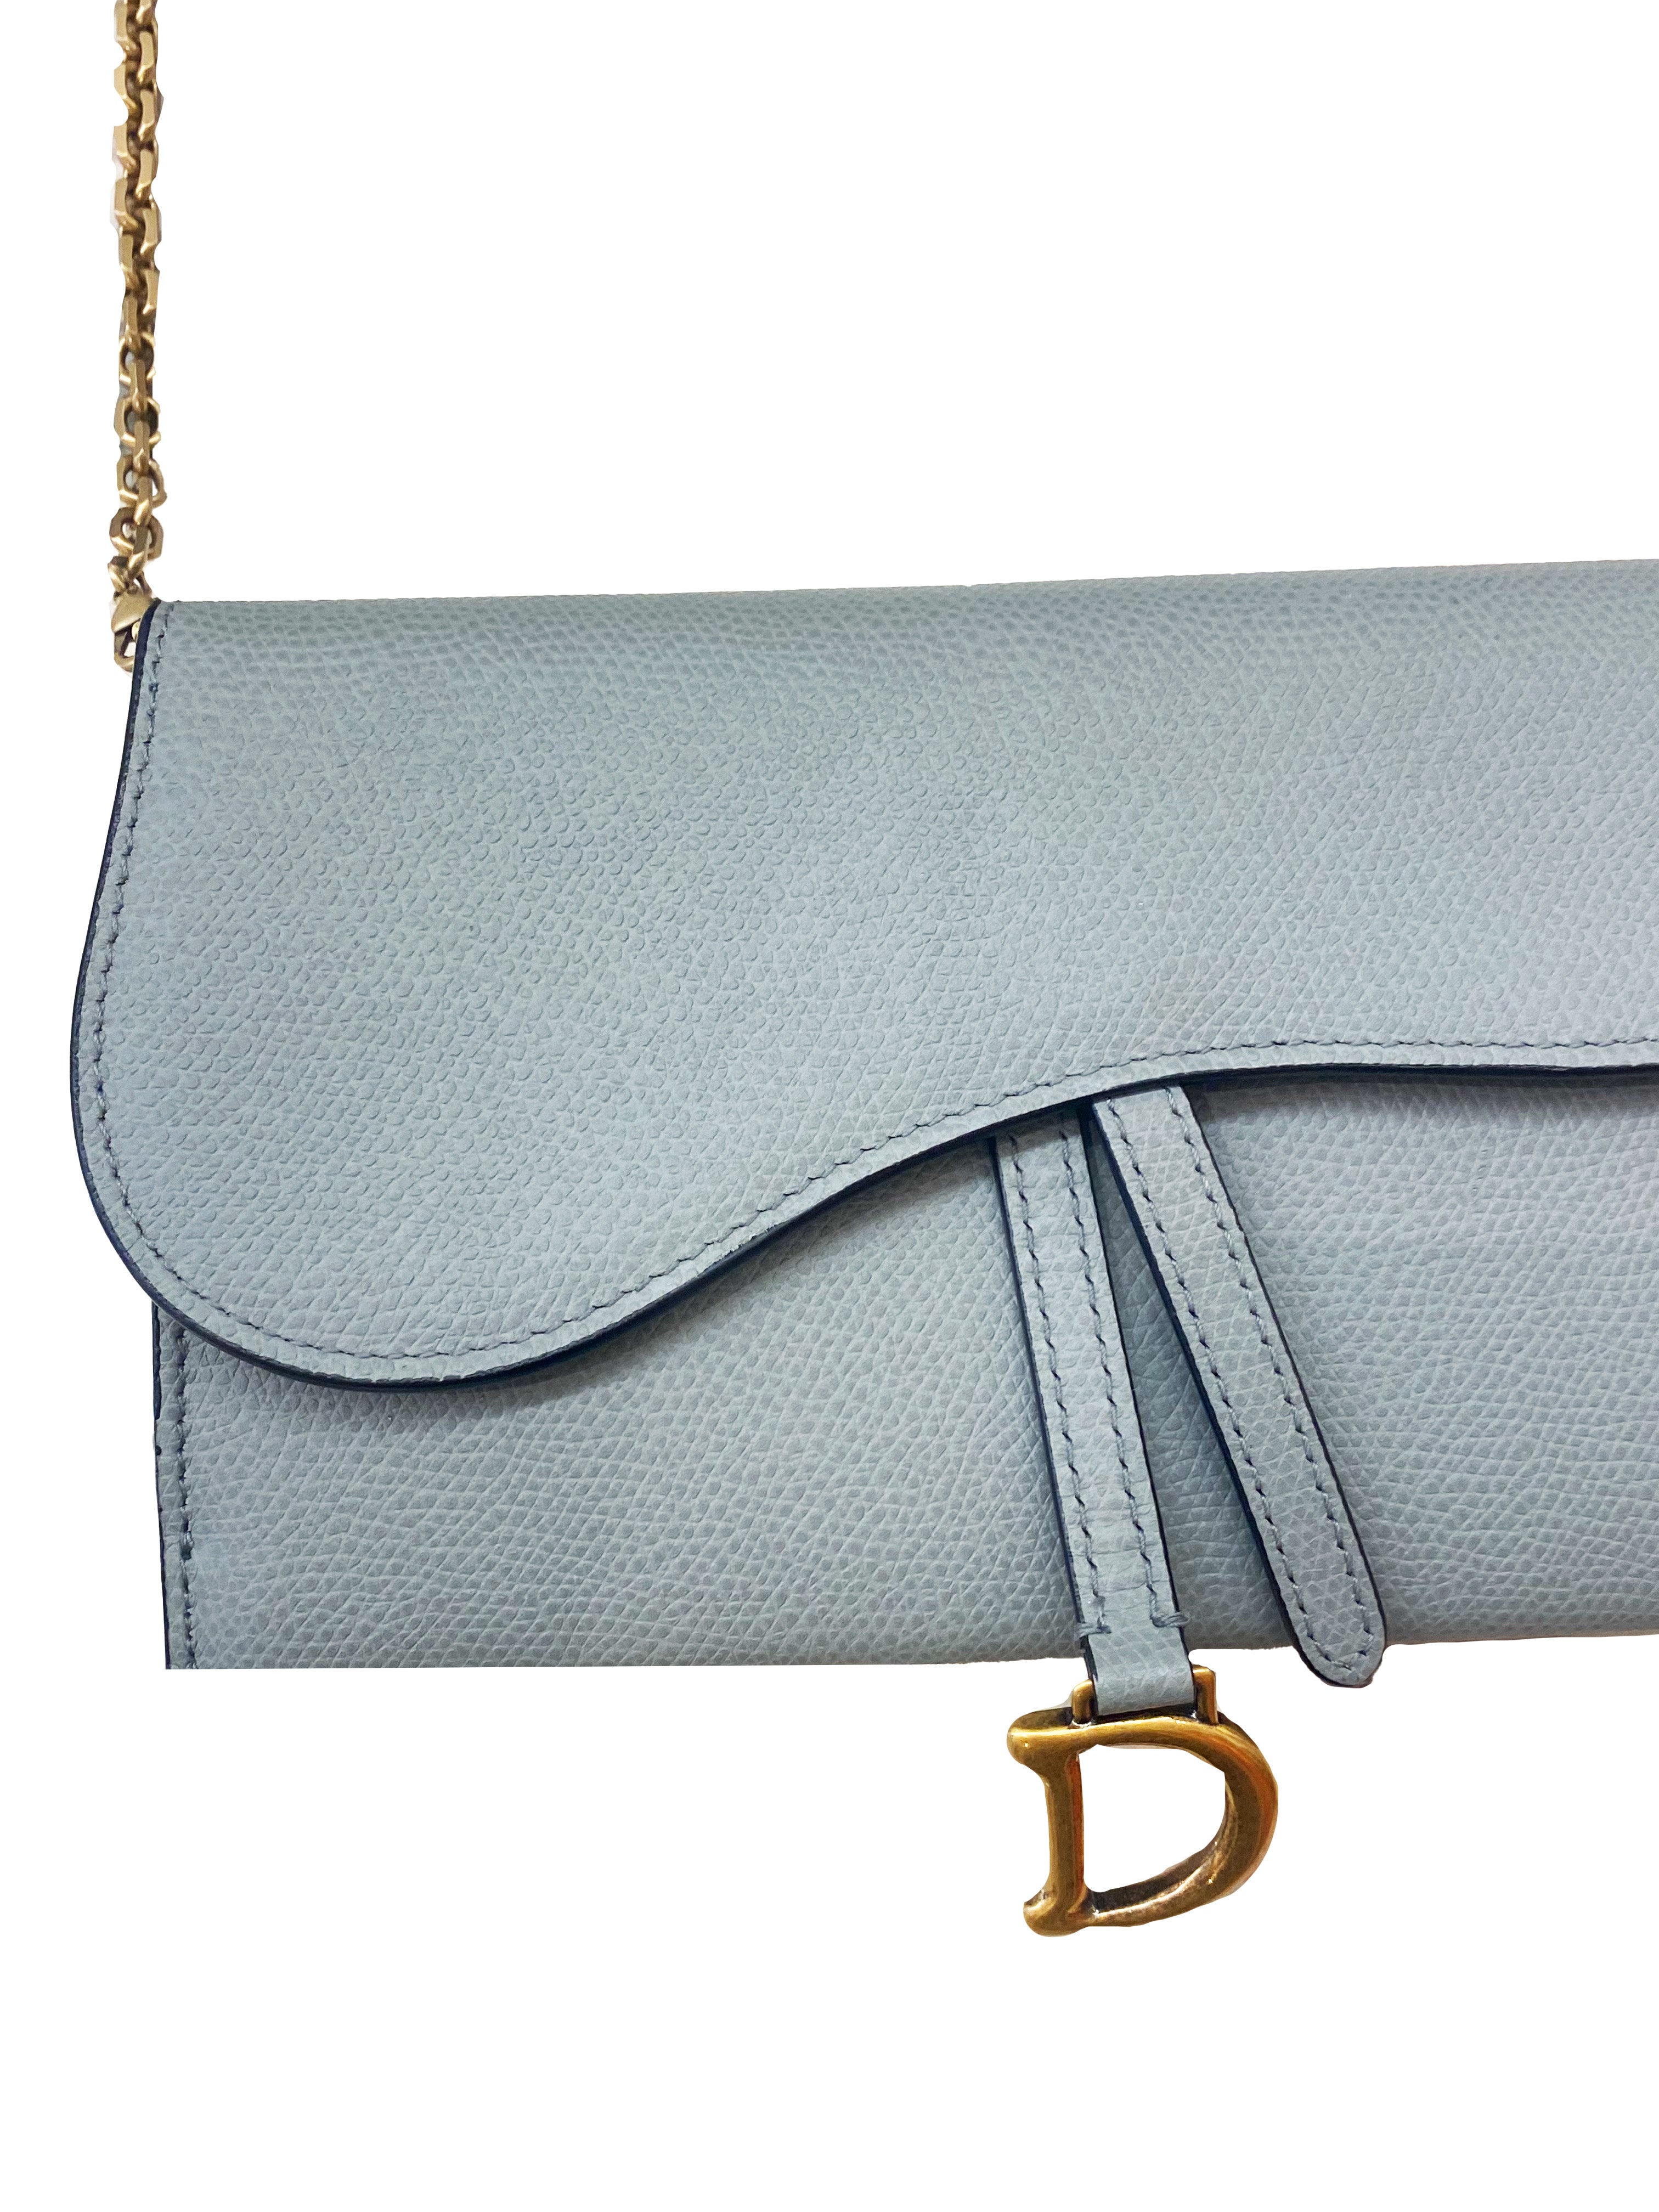 Christian Dior 2020s Saddle Wallet on a Chain · INTO